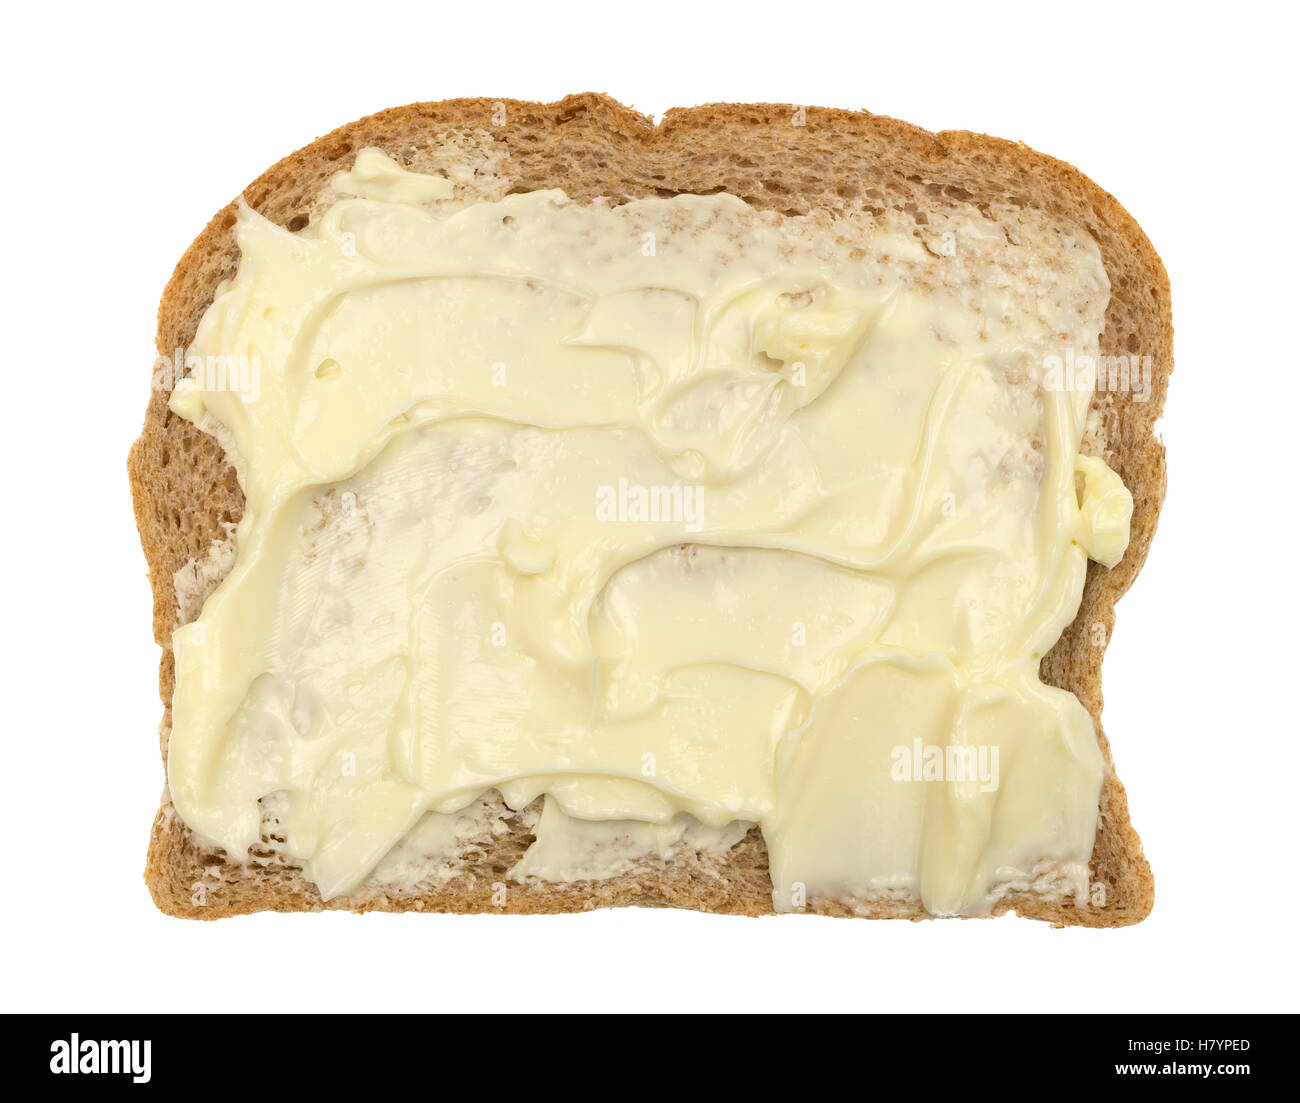 https://c8.alamy.com/comp/H7YPED/top-view-of-a-slice-of-wheat-bread-with-mayonnaise-and-margarine-isolated-H7YPED.jpg